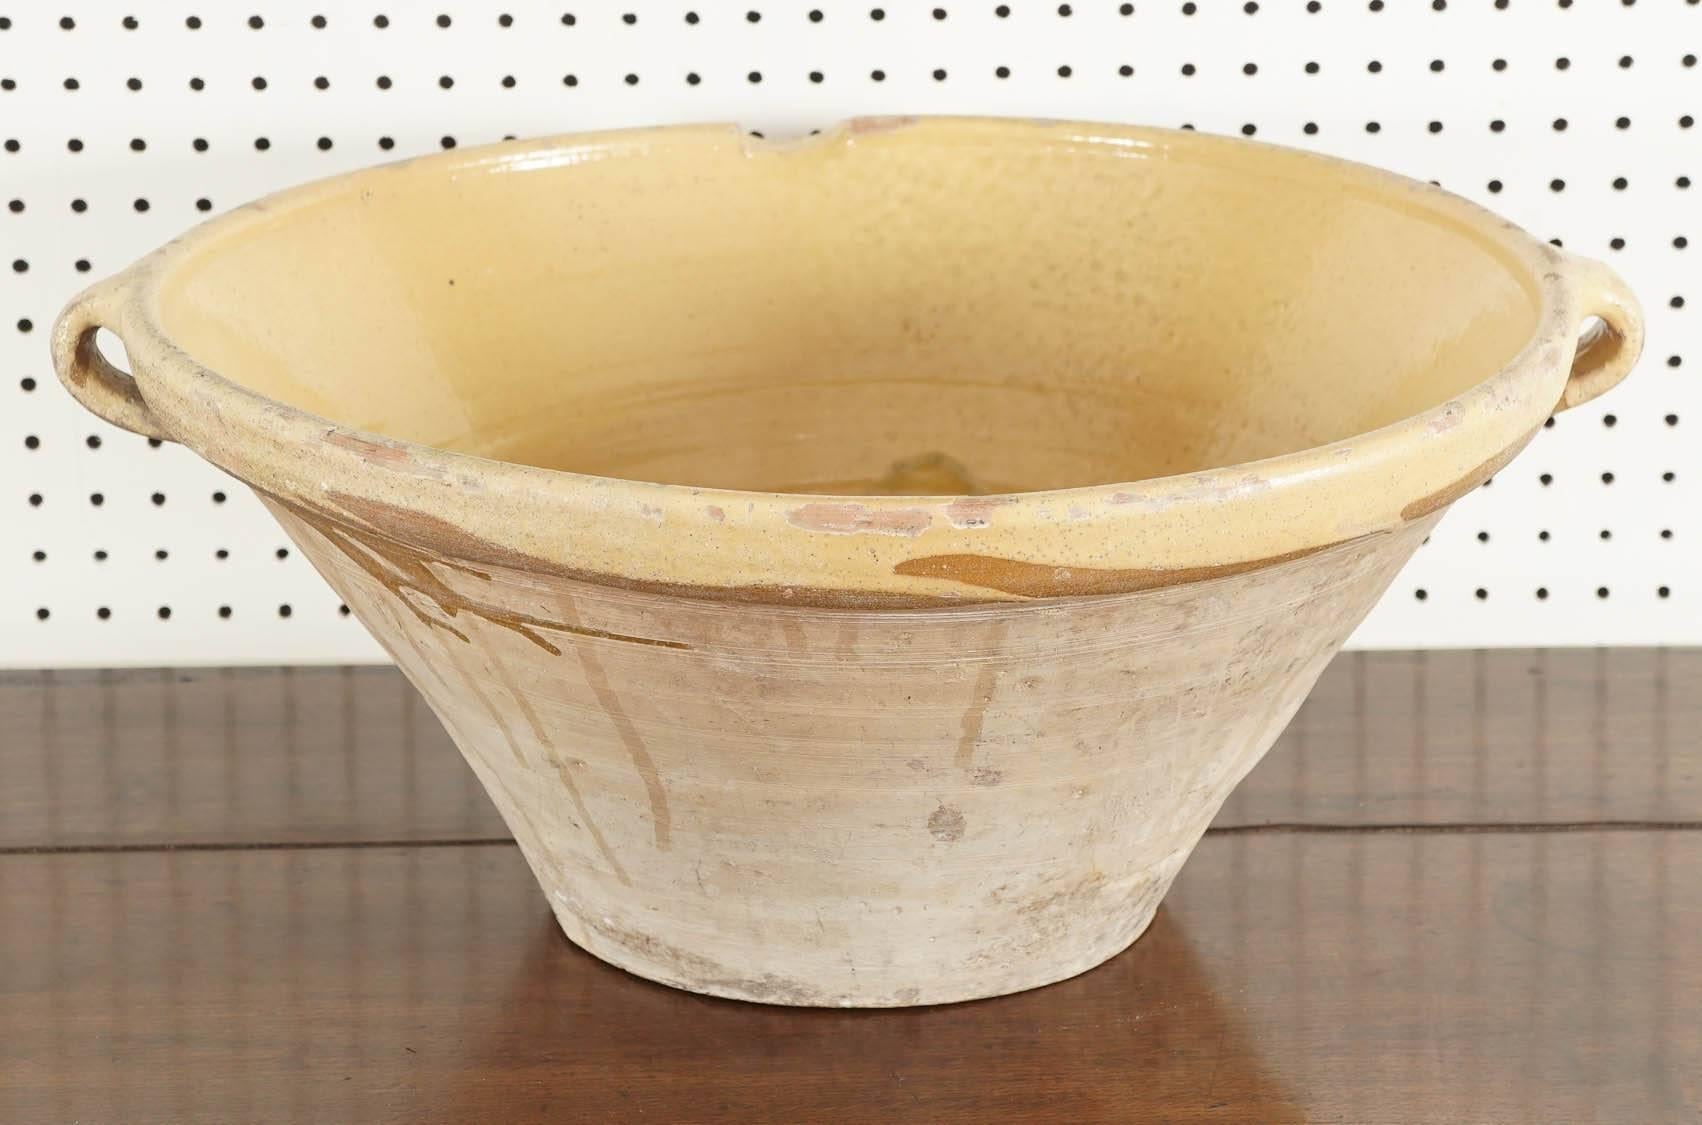 These bowls were used to make batter. The soft lemon color on the inside is beautiful and these batter bowls came with two handles to hang and S-spout to pour without holding by tipping the bowl on its side. How beautiful would these piece be for a